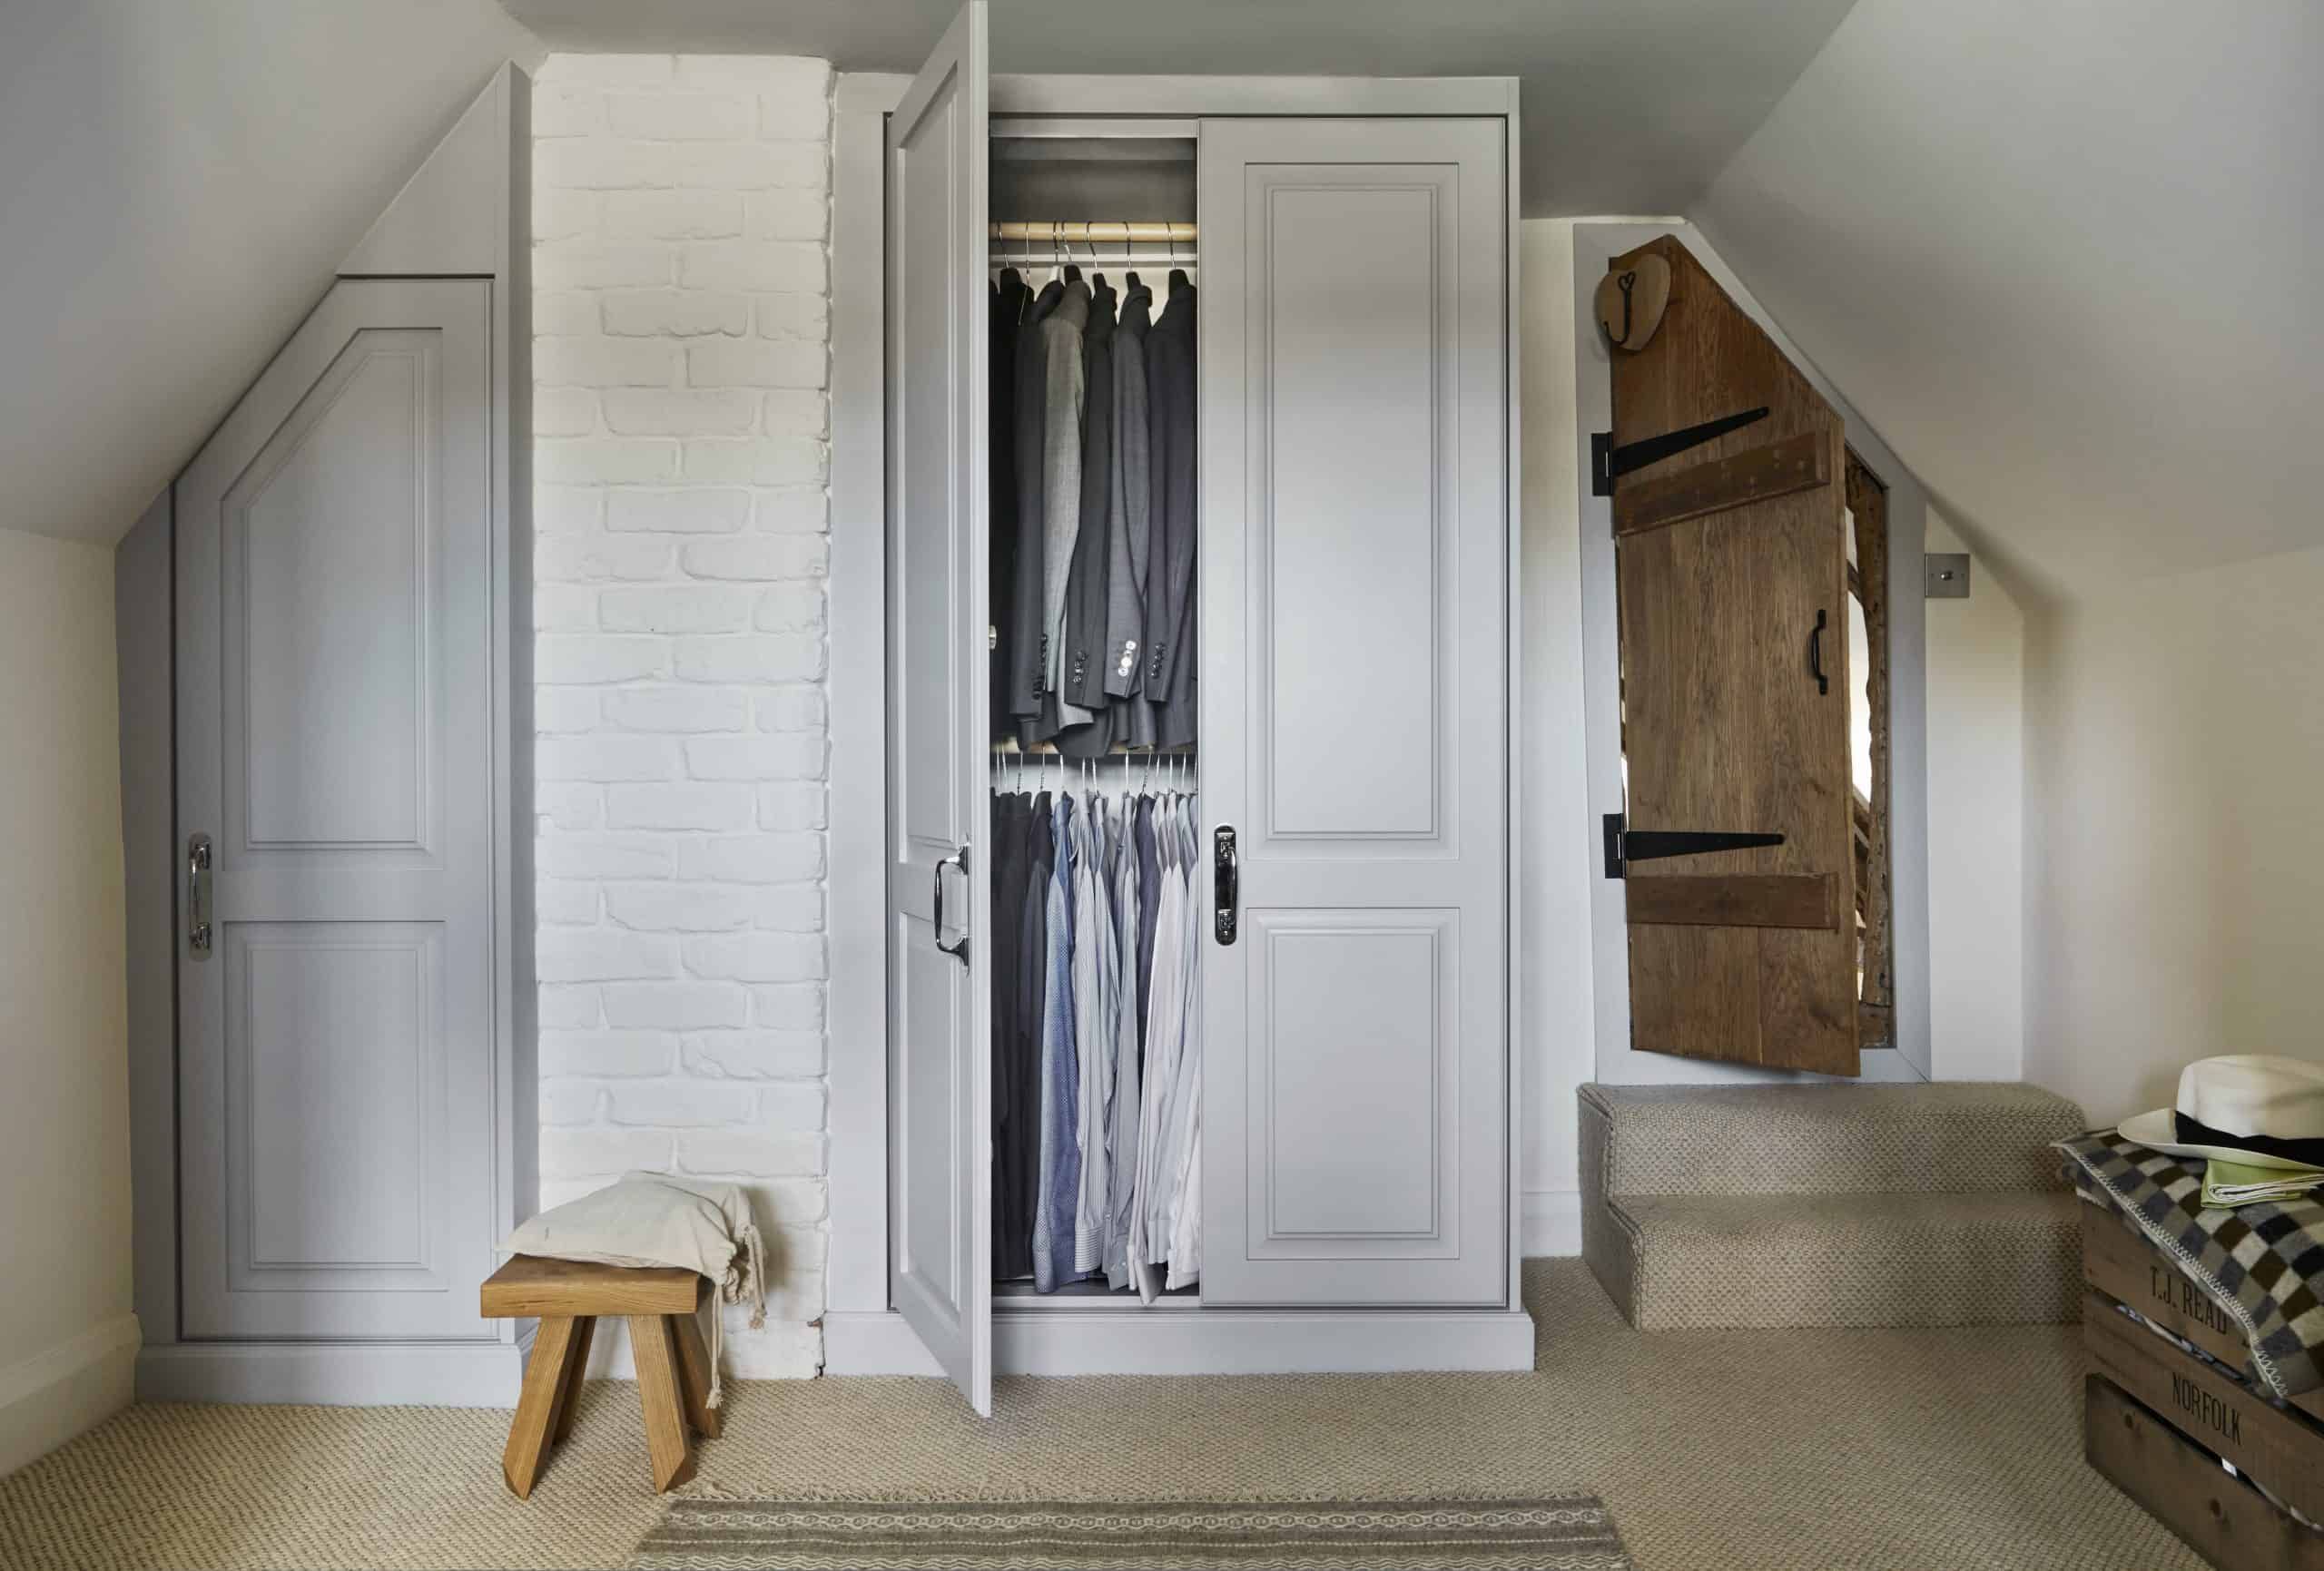 Grace In A Small Space: Small Bedroom Ideas | John Lewis Of Hungerford In Small Wardrobes (View 4 of 14)